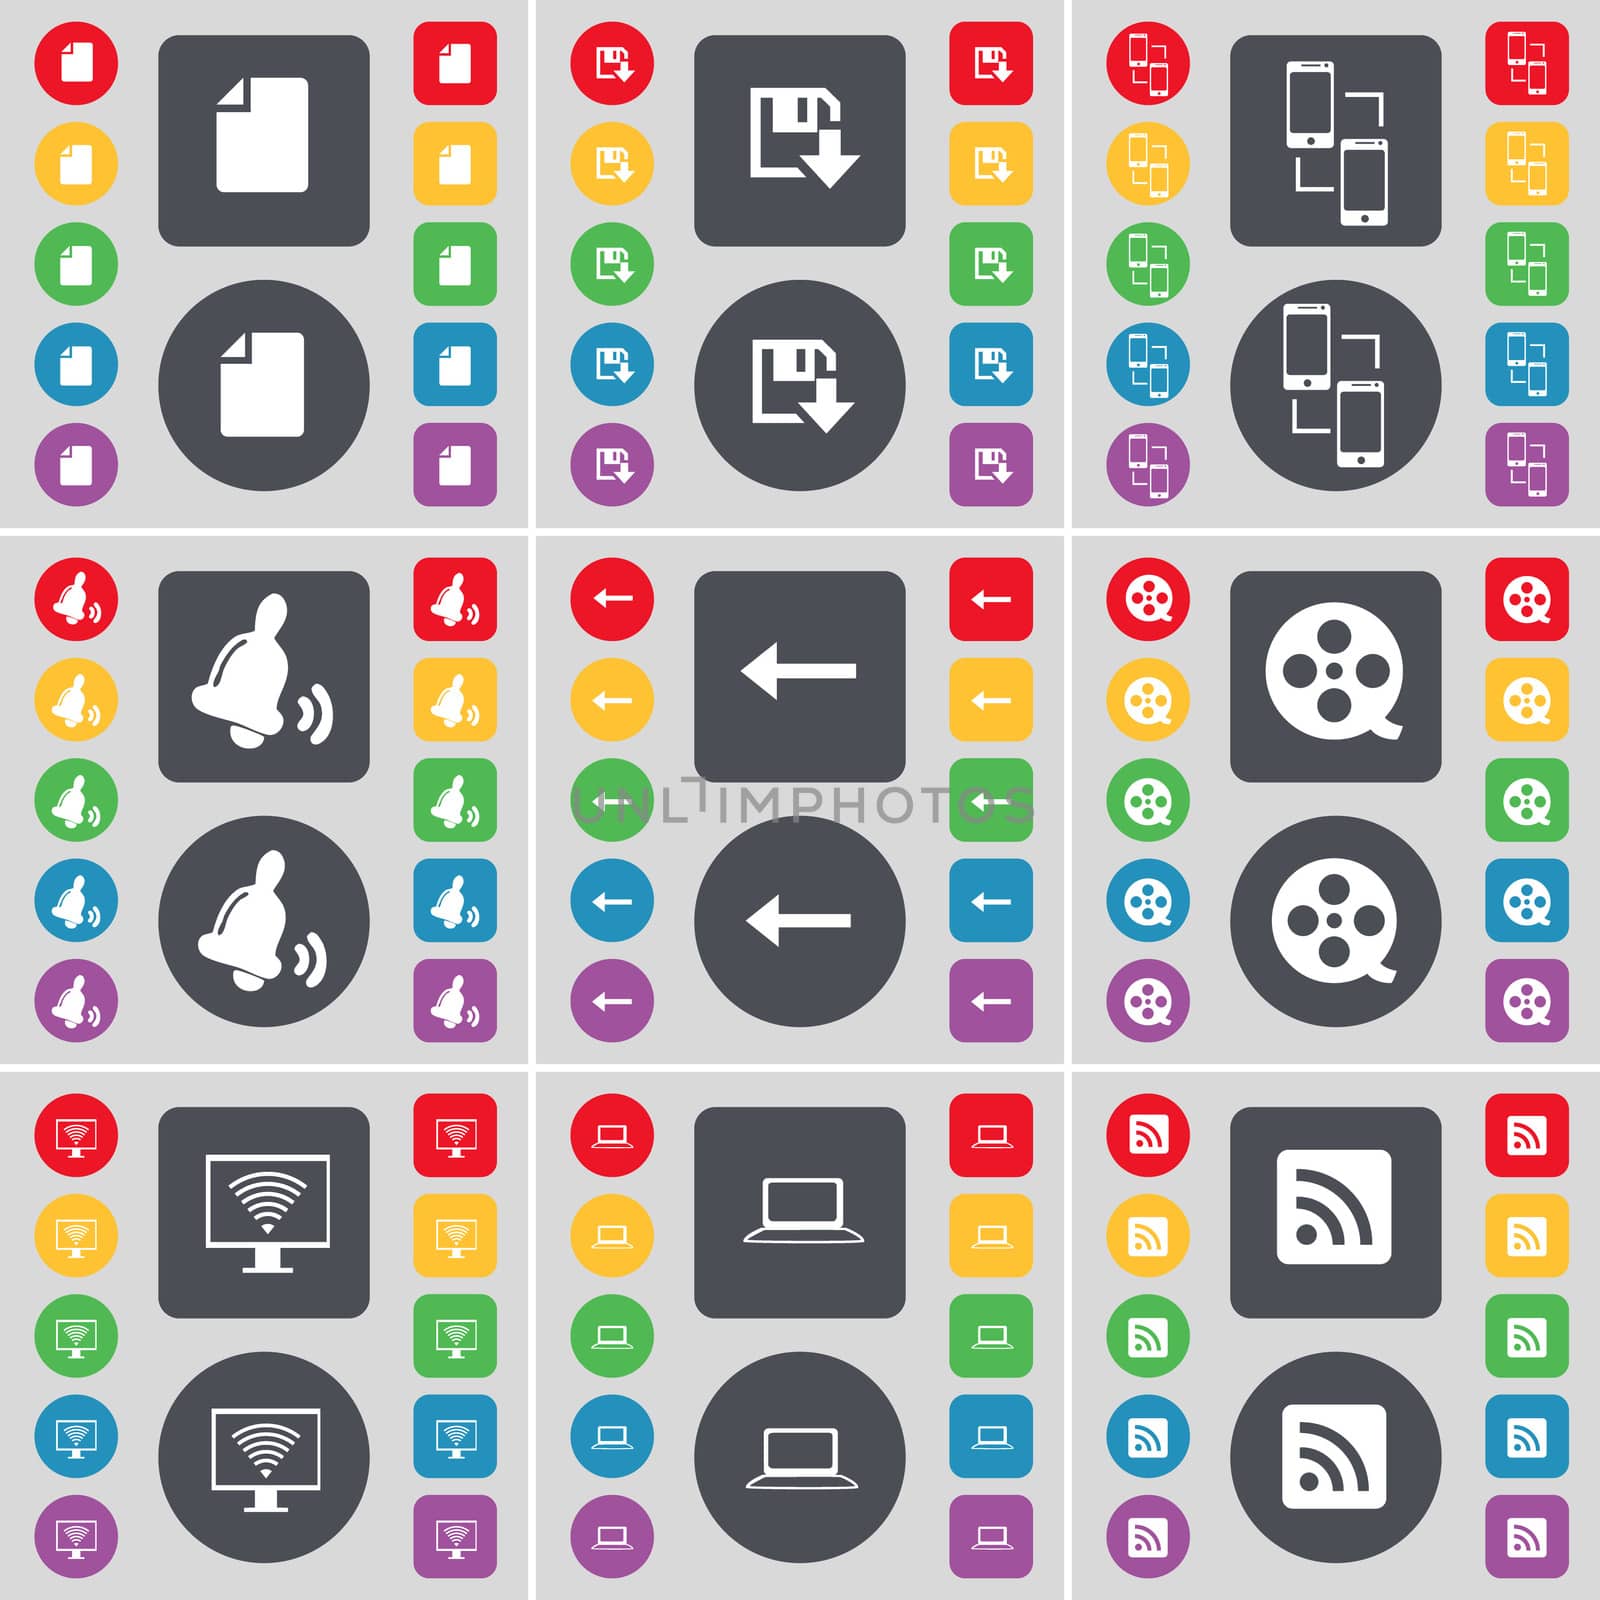 File, Floppy, Connection, Bell, Arrow left, Videotape, Monitor, Laptop, RSS icon symbol. A large set of flat, colored buttons for your design. illustration